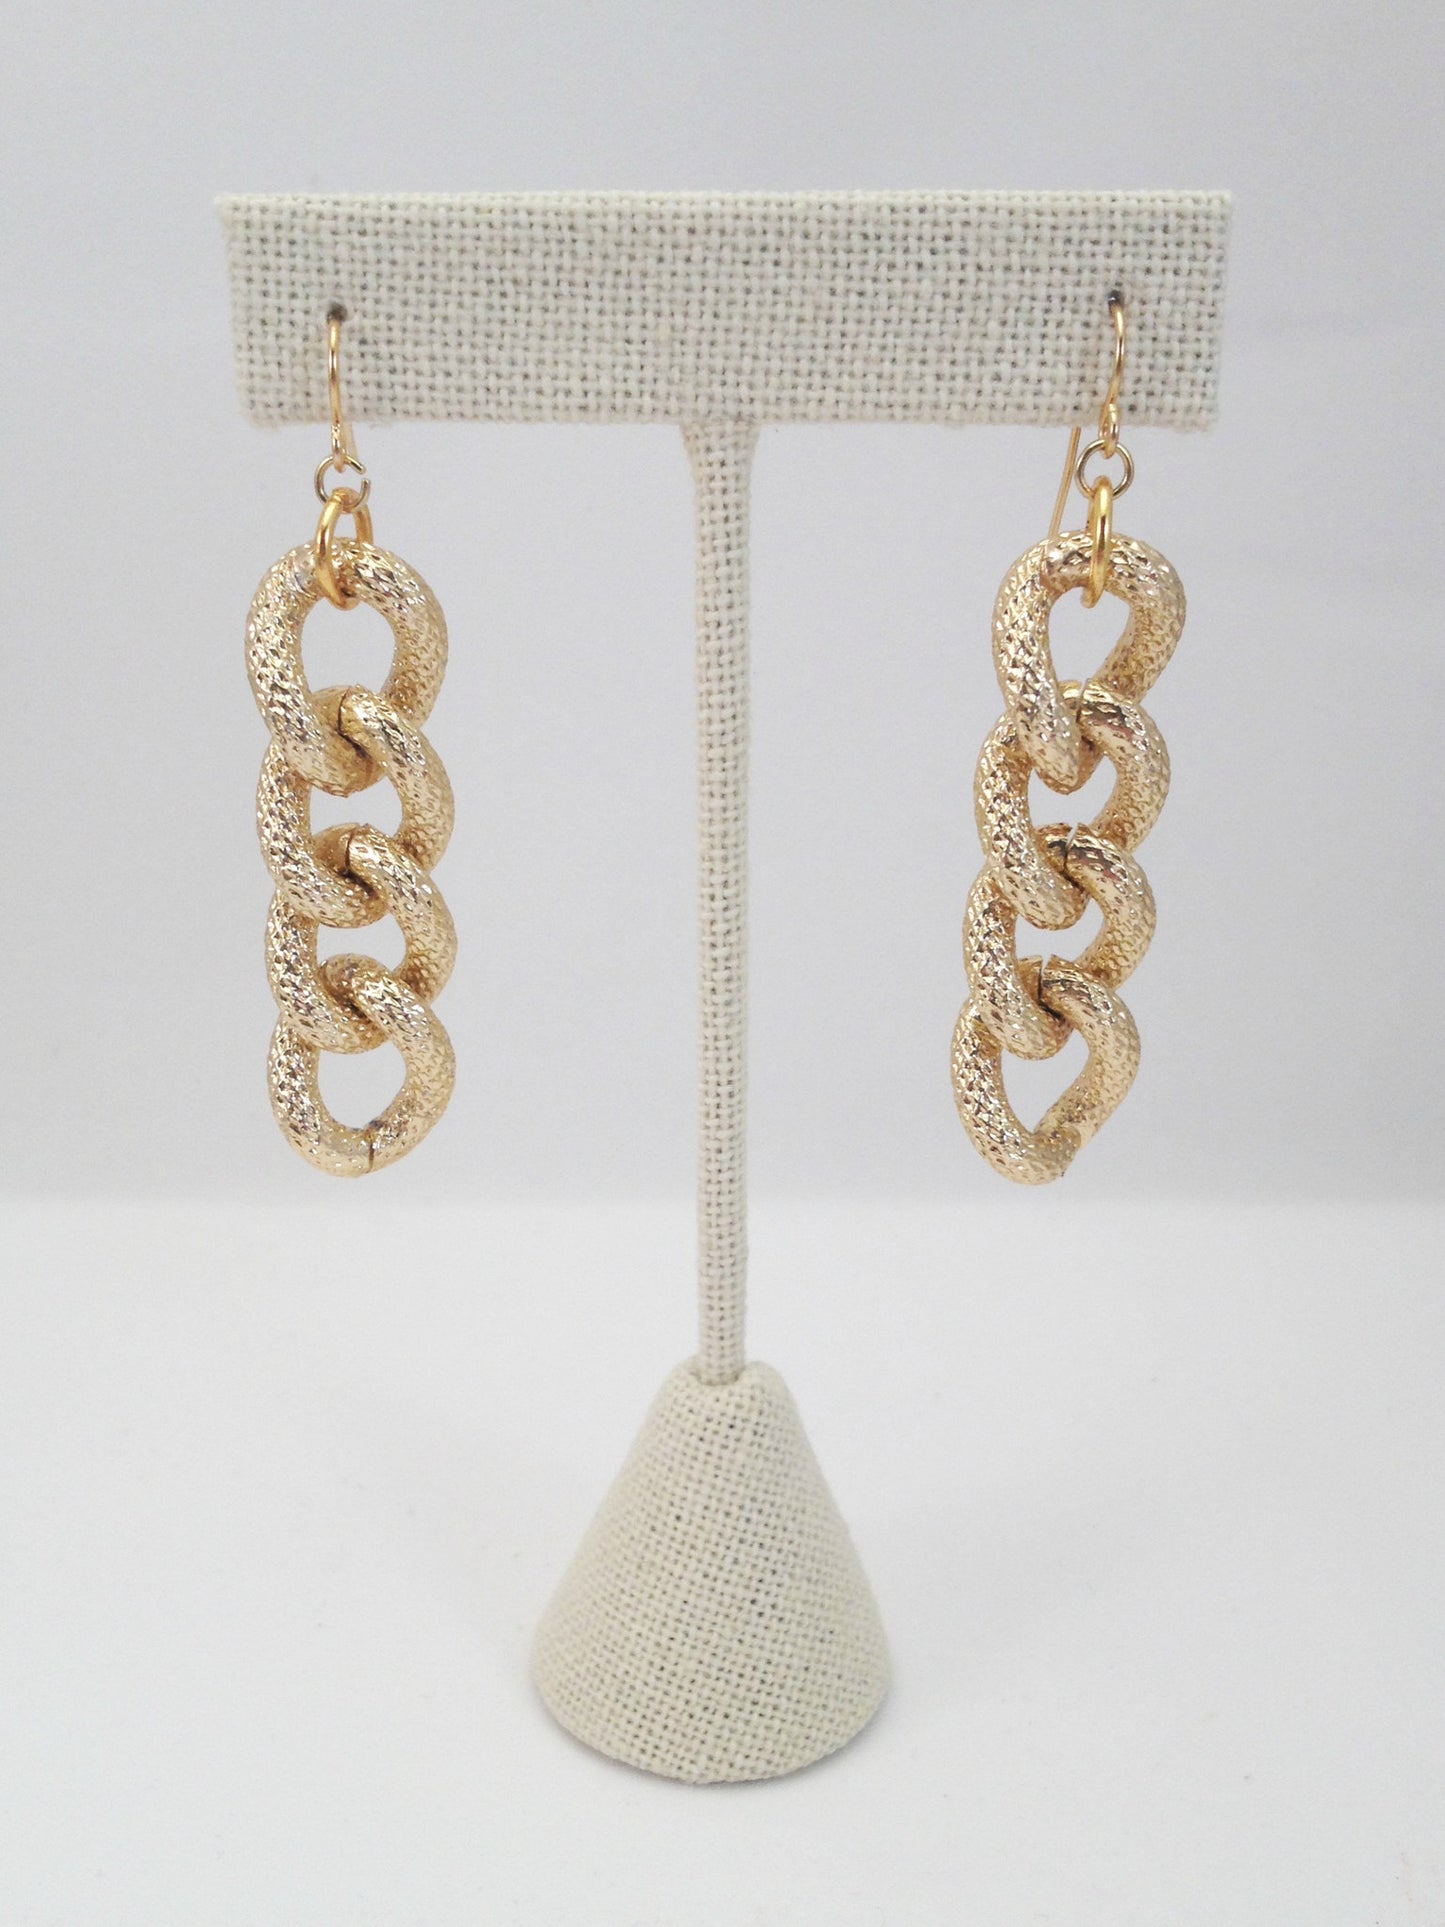 4 chain link earrings, textured